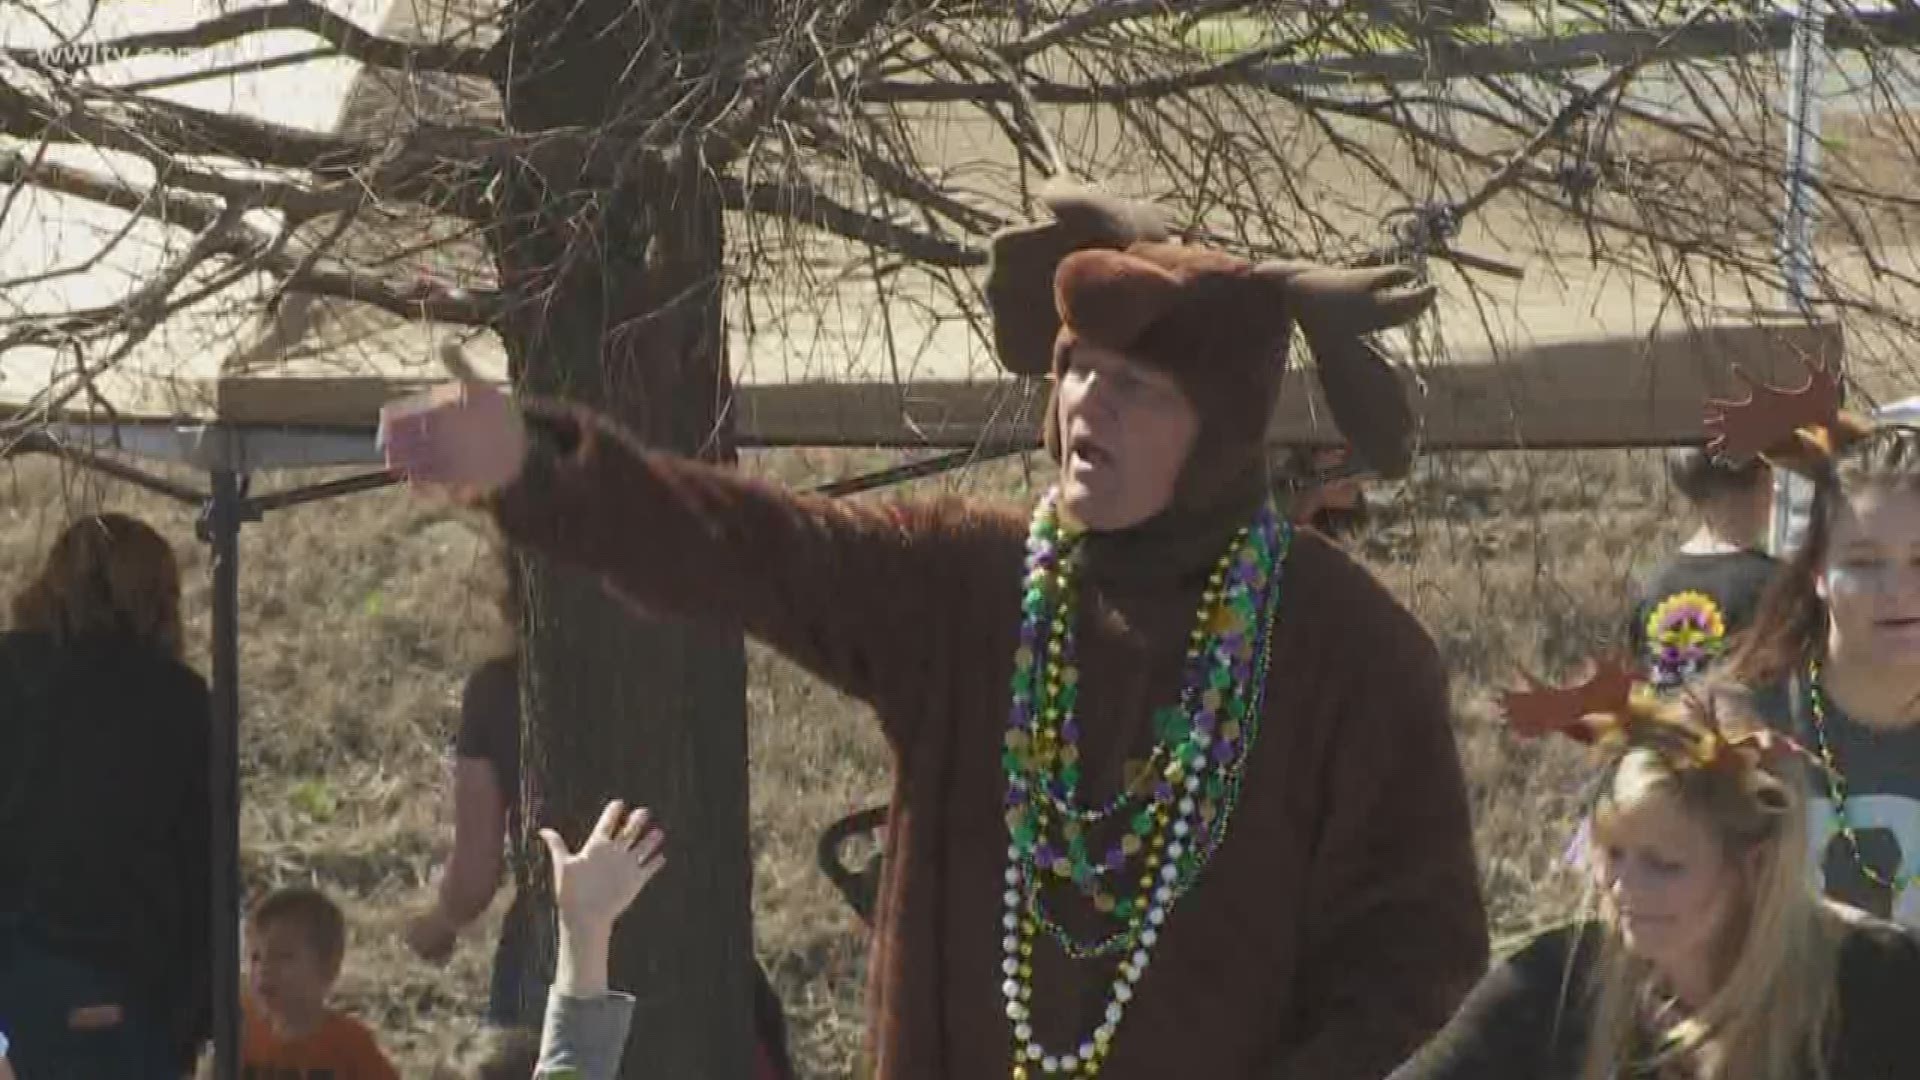 Mike 'the Moose' Hoss was rolling again at Mardi Gras, this time as the Parade Marshal in the Krewe of Argus. 